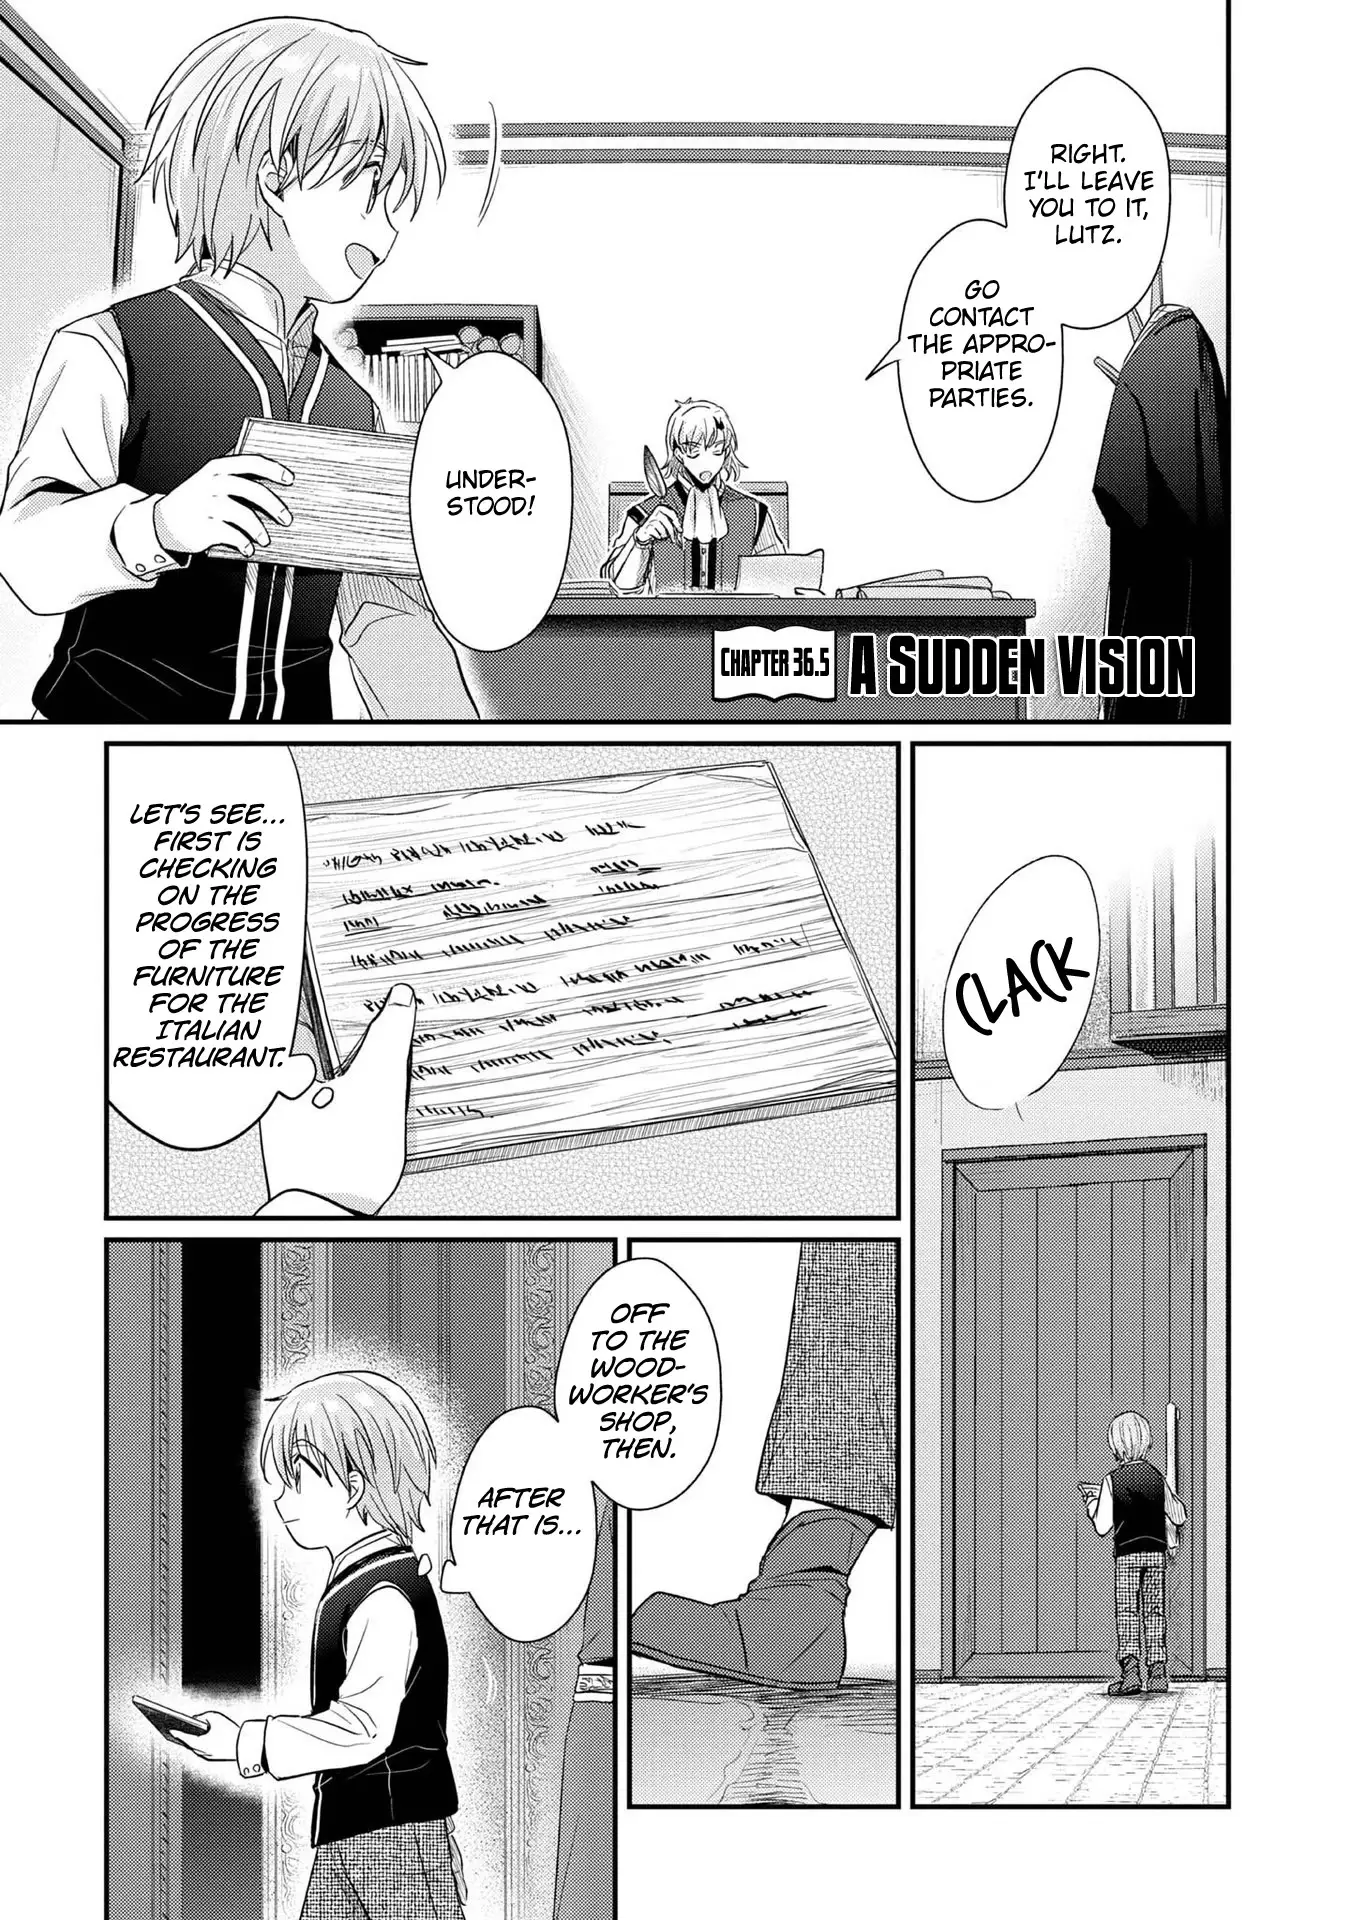 Ascendance Of A Bookworm ~I'll Do Anything To Become A Librarian~ Part 2 「I'll Become A Shrine Maiden For Books!」 - 36.5 page 2-2ace0aca